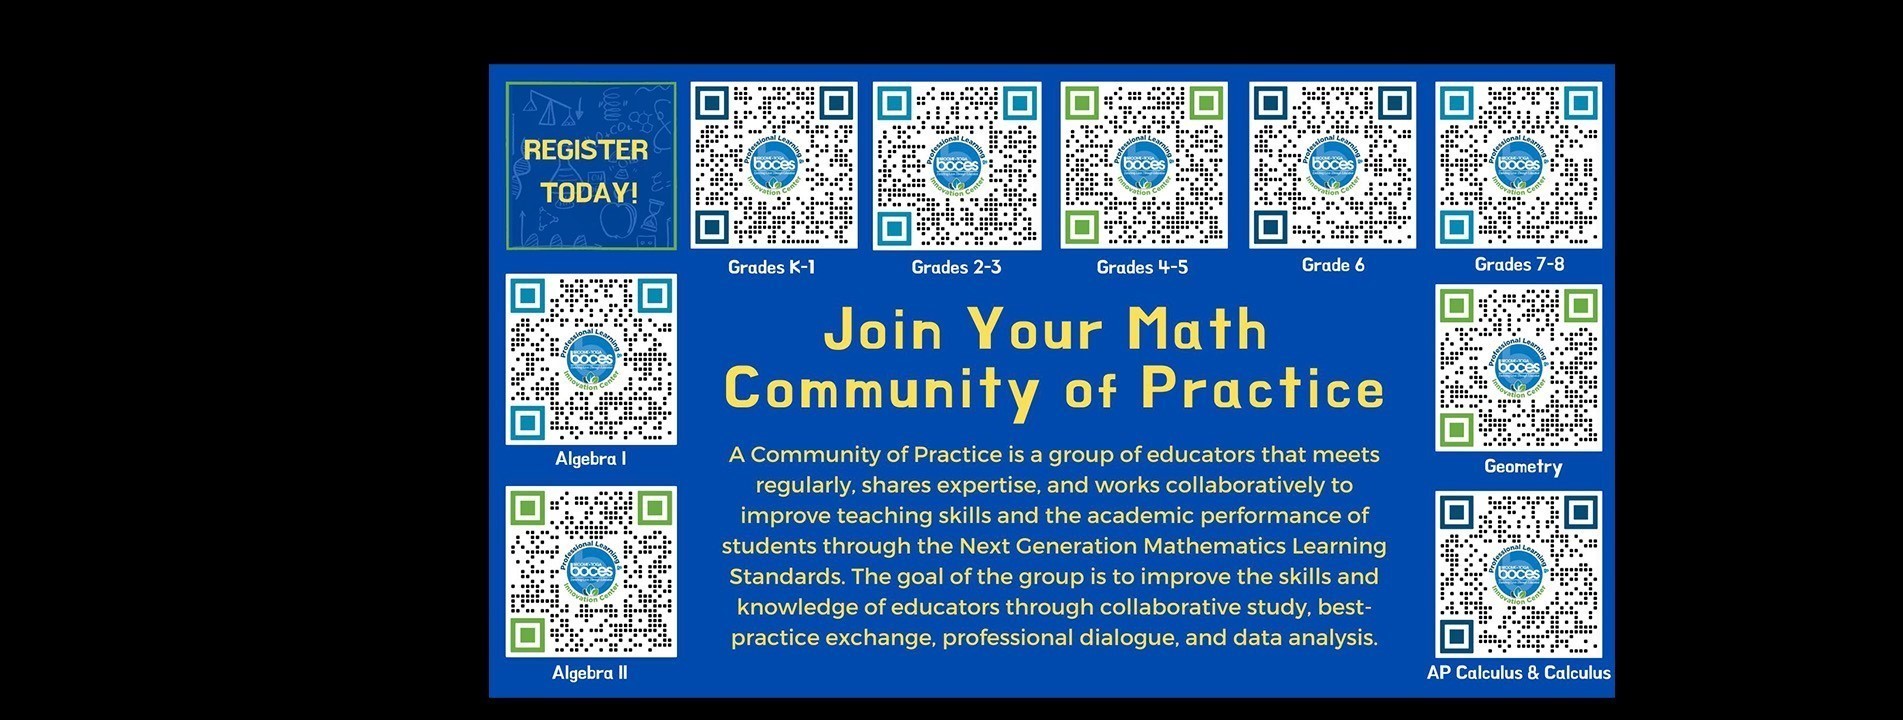 Join Your Math Community of Practice. A Community of Practice is a group of educators that meets regularly, shares expertise, and works collaboratively to improve teaching skills and the academic performance of students through the Next Generation Mathematics Learning Standards. The goal of the group is to improve the skills and knowledge of educators through collaborative study, best-practice exchange, professional dialogue, and data analysis. Grades K-1; Grades 2-3; Grades 4-5; Grade 6; Grades 7-8; Algebra 1; Algebra 2; Geometry; AP Calculus and Calculus